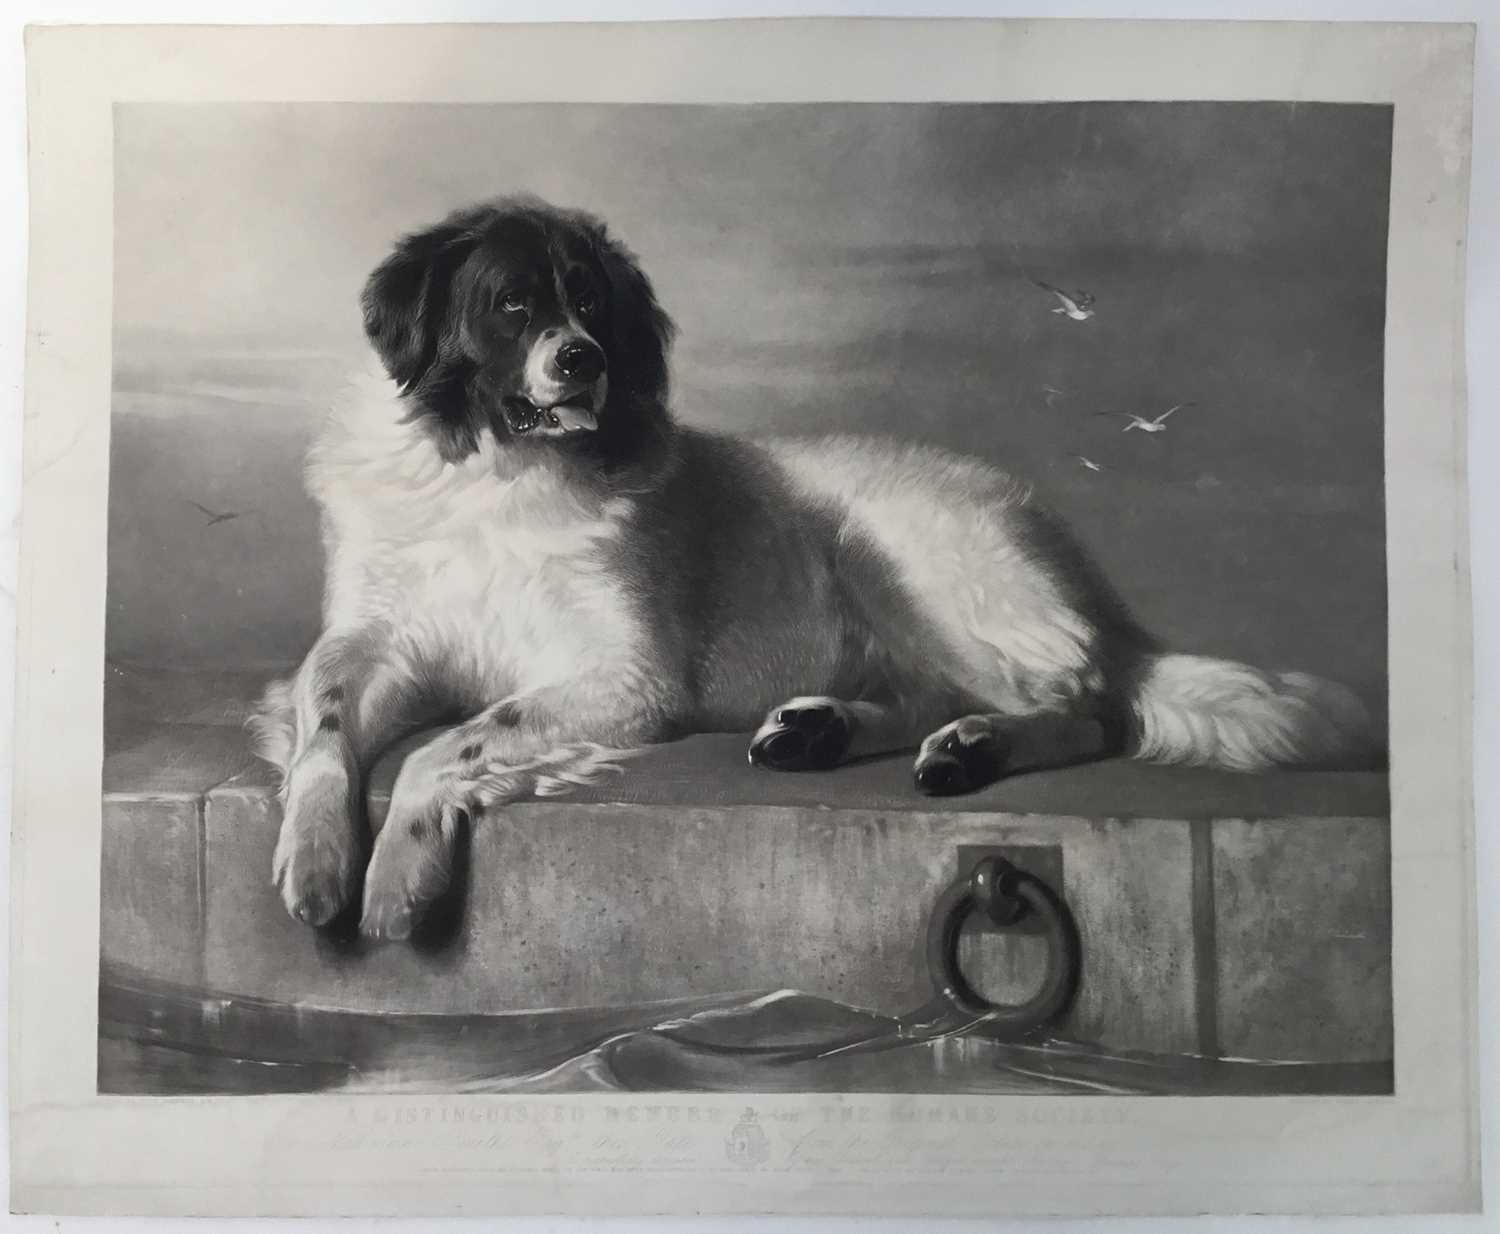 Lot 41 - Thomas Landseer, after Edwin Landseer, mid 19th century black and white engraving - A Distinguished Member of the Humane Society, published 1853 by Thomas Boys, 58cm x 70cm